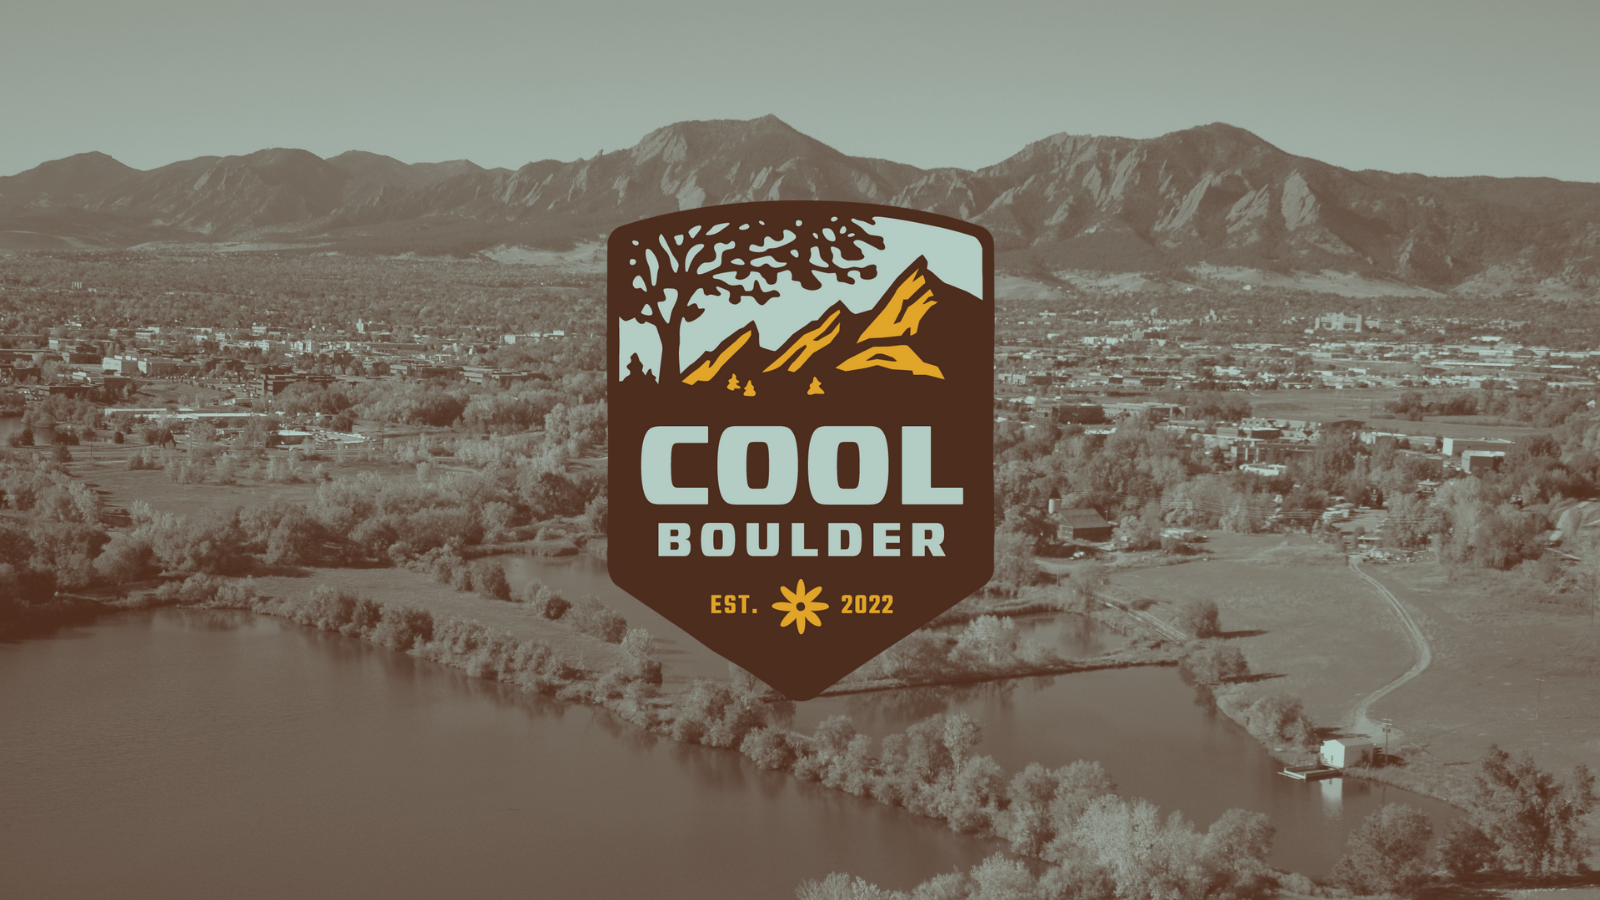 Cool Boulder logo placed on an aerial photo of the Boulder valley